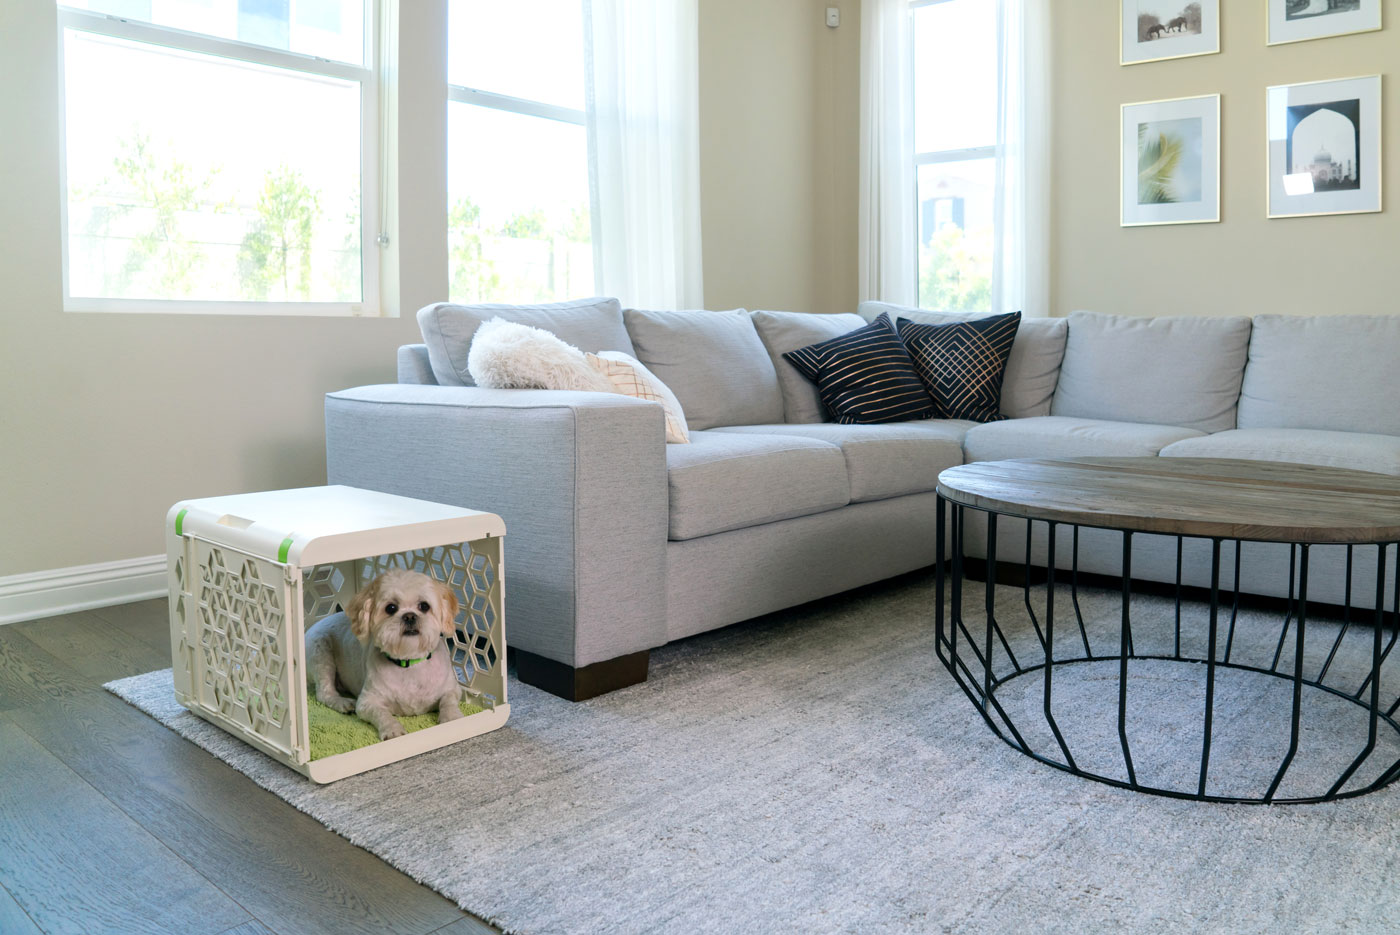 Amy Kim of Chasing Monkey had one goal when she launched PAWD: to create a premium, stylish dog crate that is also affordable.  She succeeded! This crate is functional, gorgeous, and portable with a target price well under $100. Want to learn more? Check out our interview with Amy and enter to win one of your own!